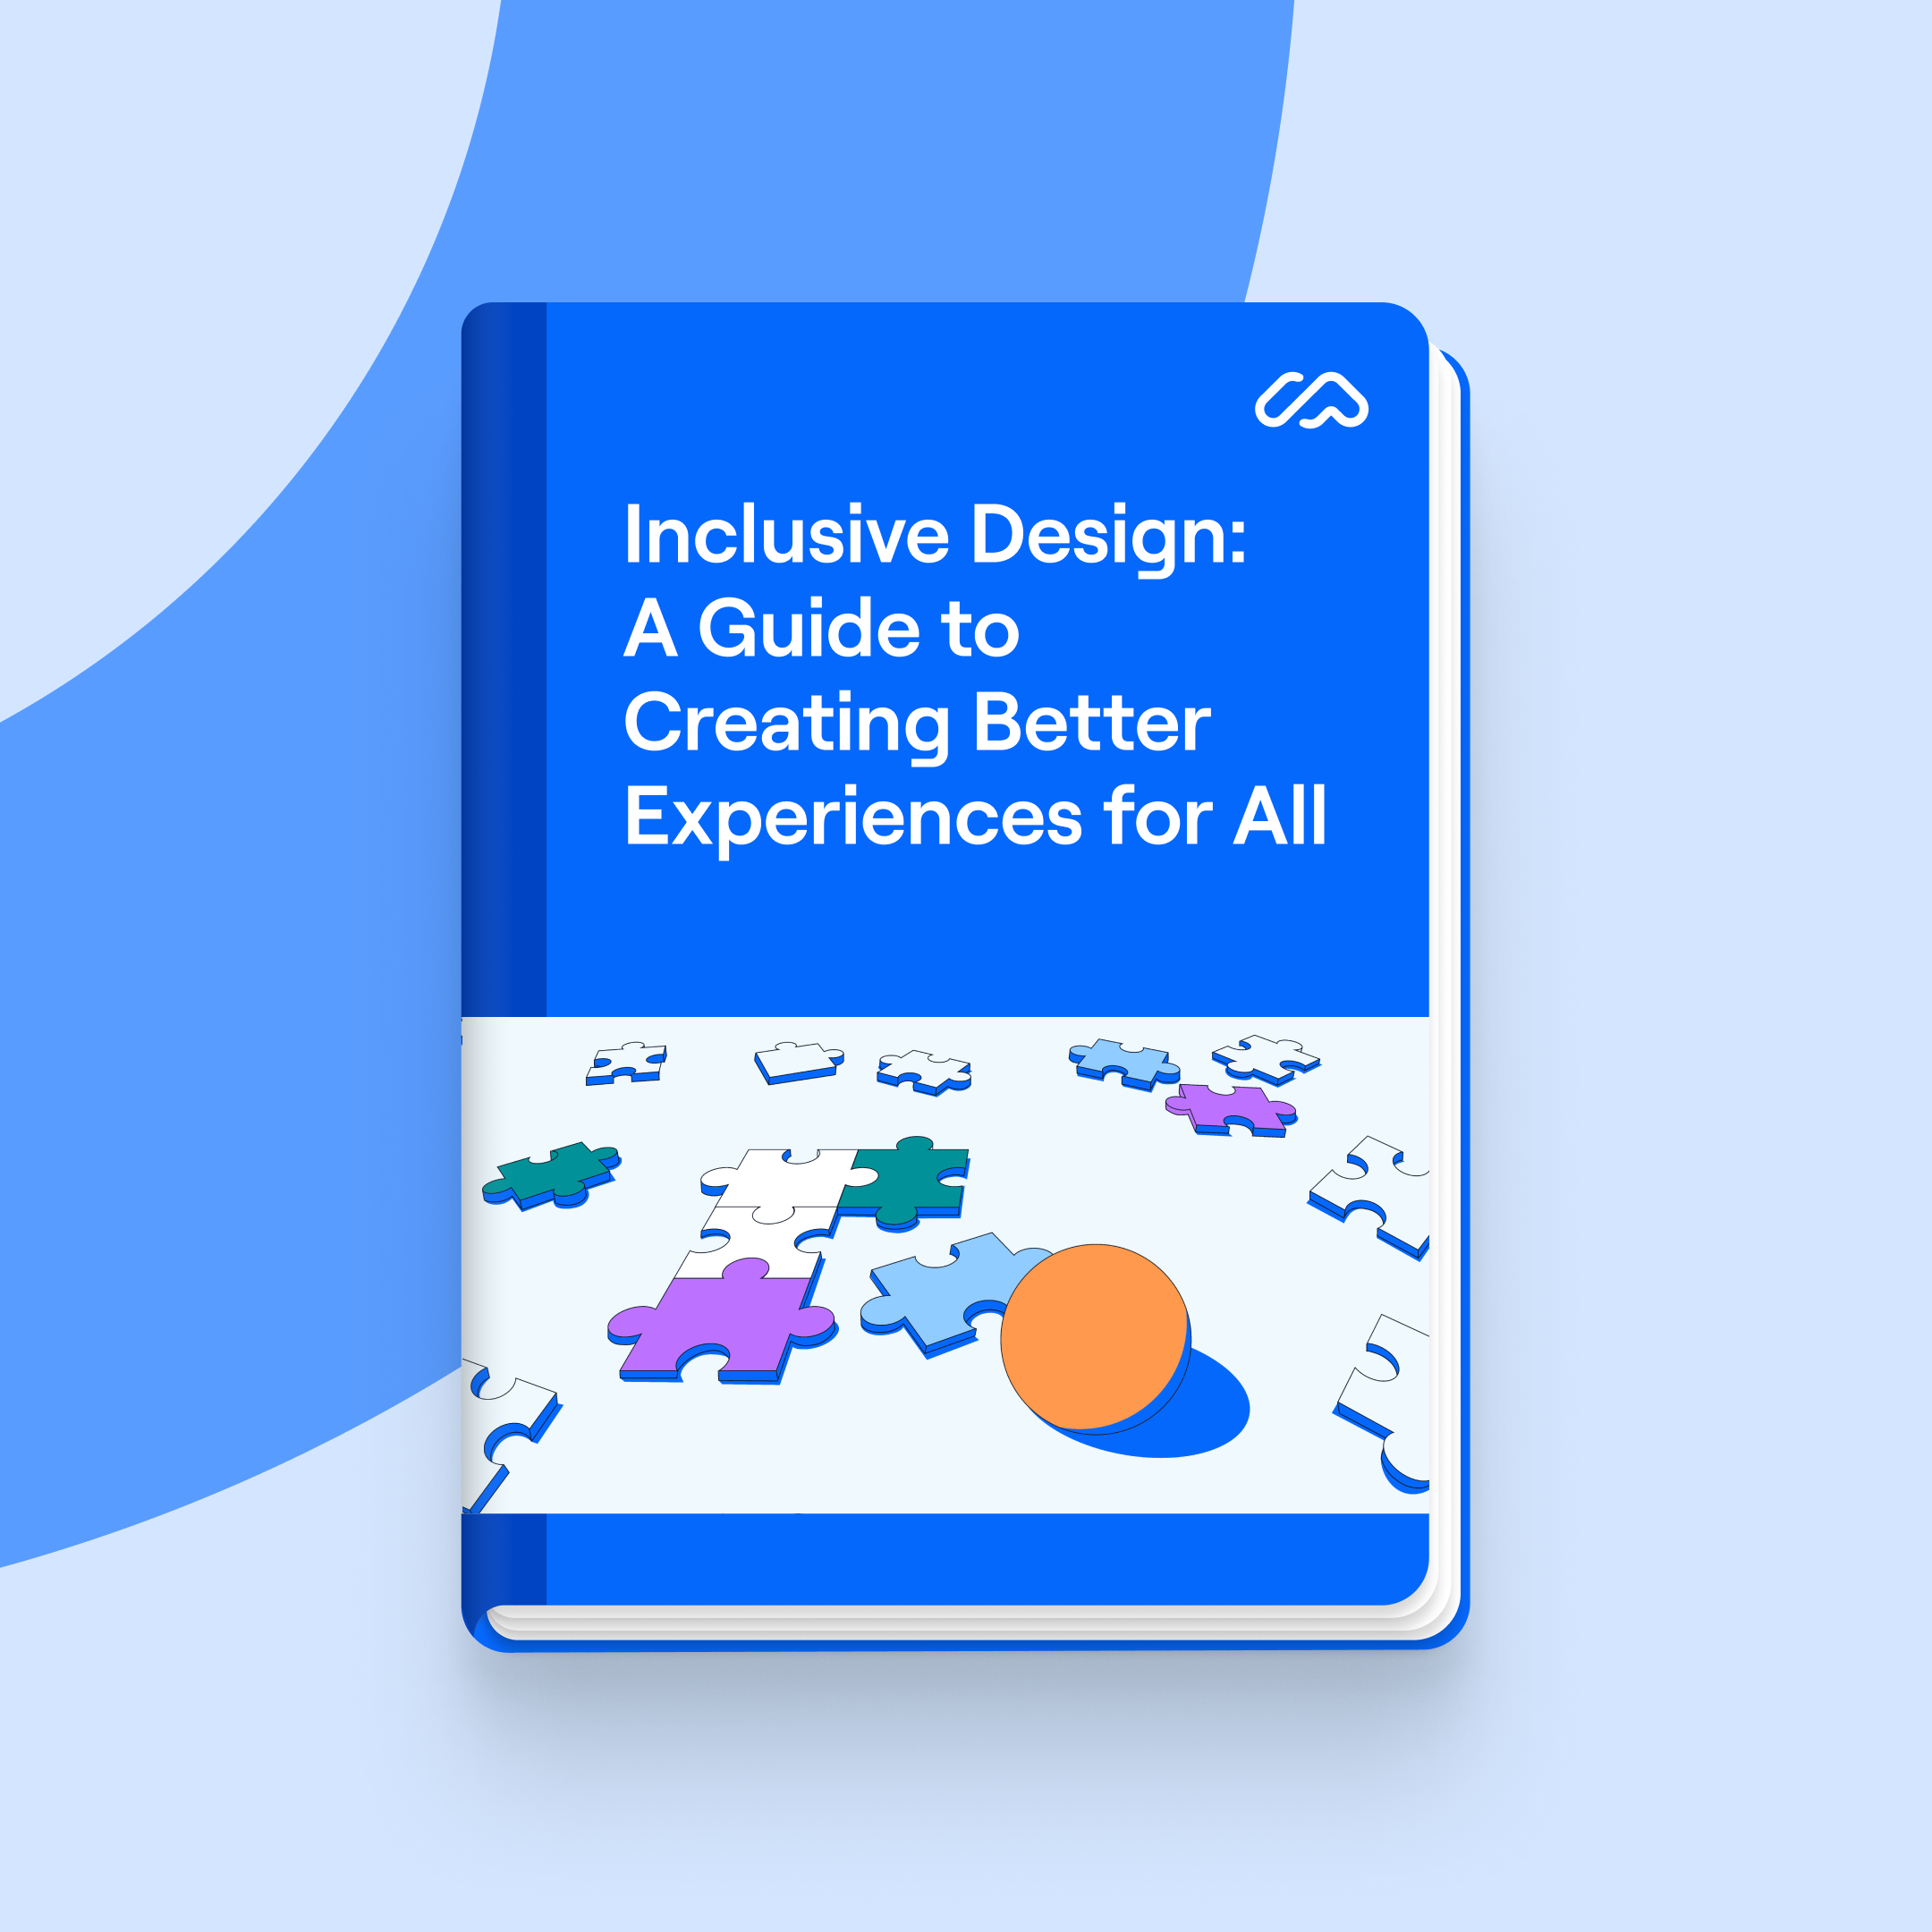 Inclusive Design: Creating Better Experiences for All